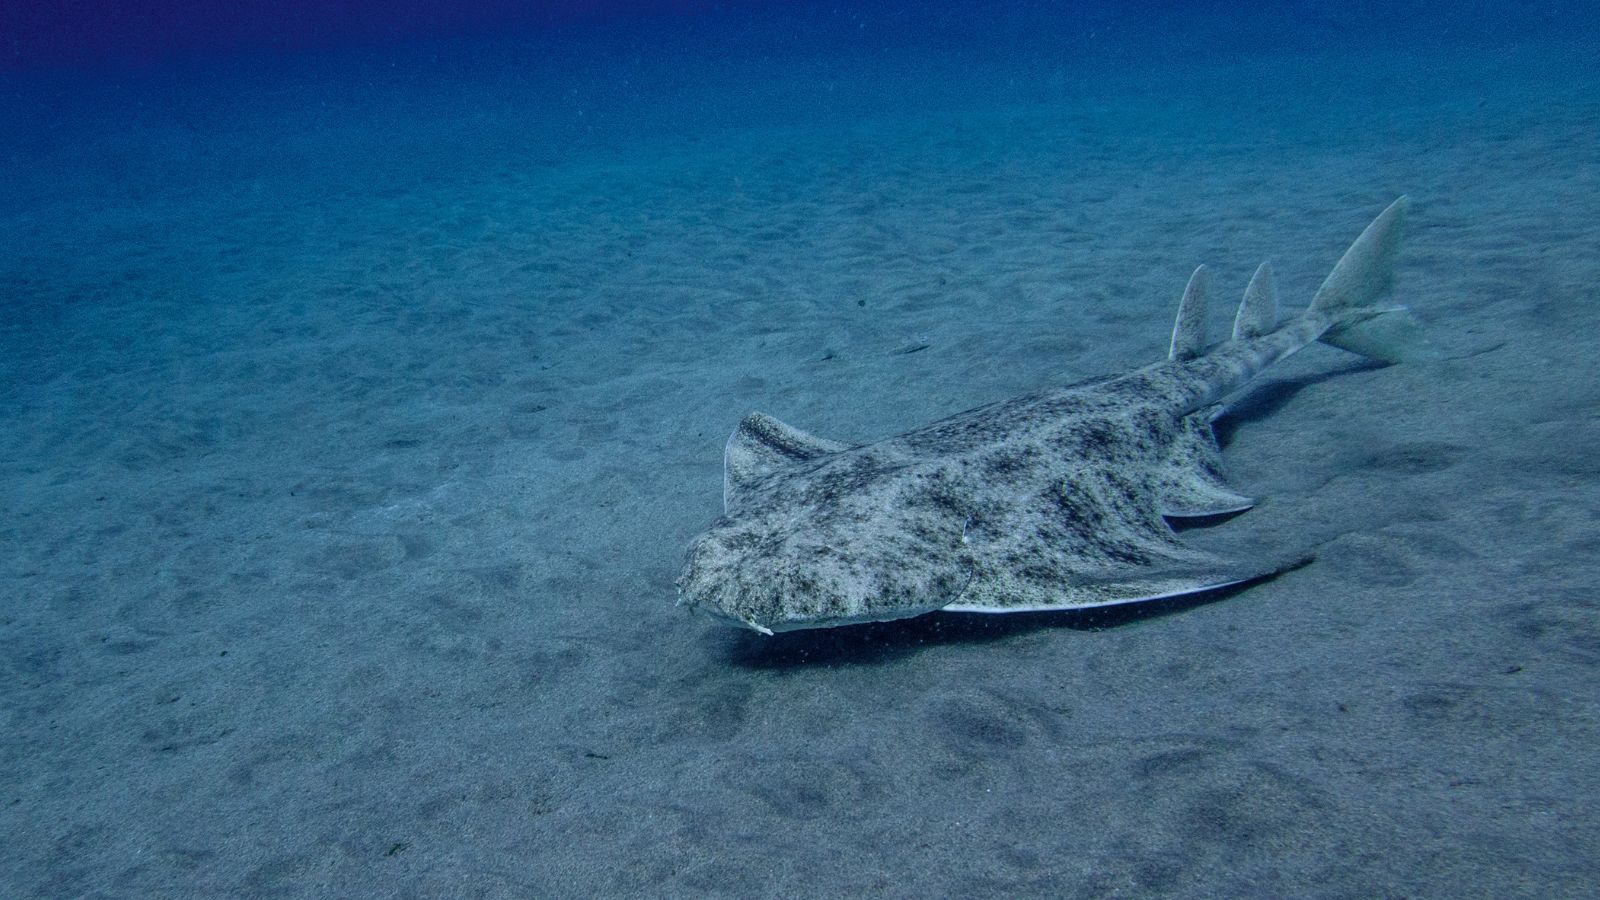 <p><span>The angel shark can be identified by its original flat body and sandy color, which help it blend into the ocean floor. Despite this disguise, this marine shark is critically endangered due to targeted fishing and habitat disturbance. Restrictions on bottom trawling have been implemented to conserve the remains of essential habitats and save this species.</span></p>